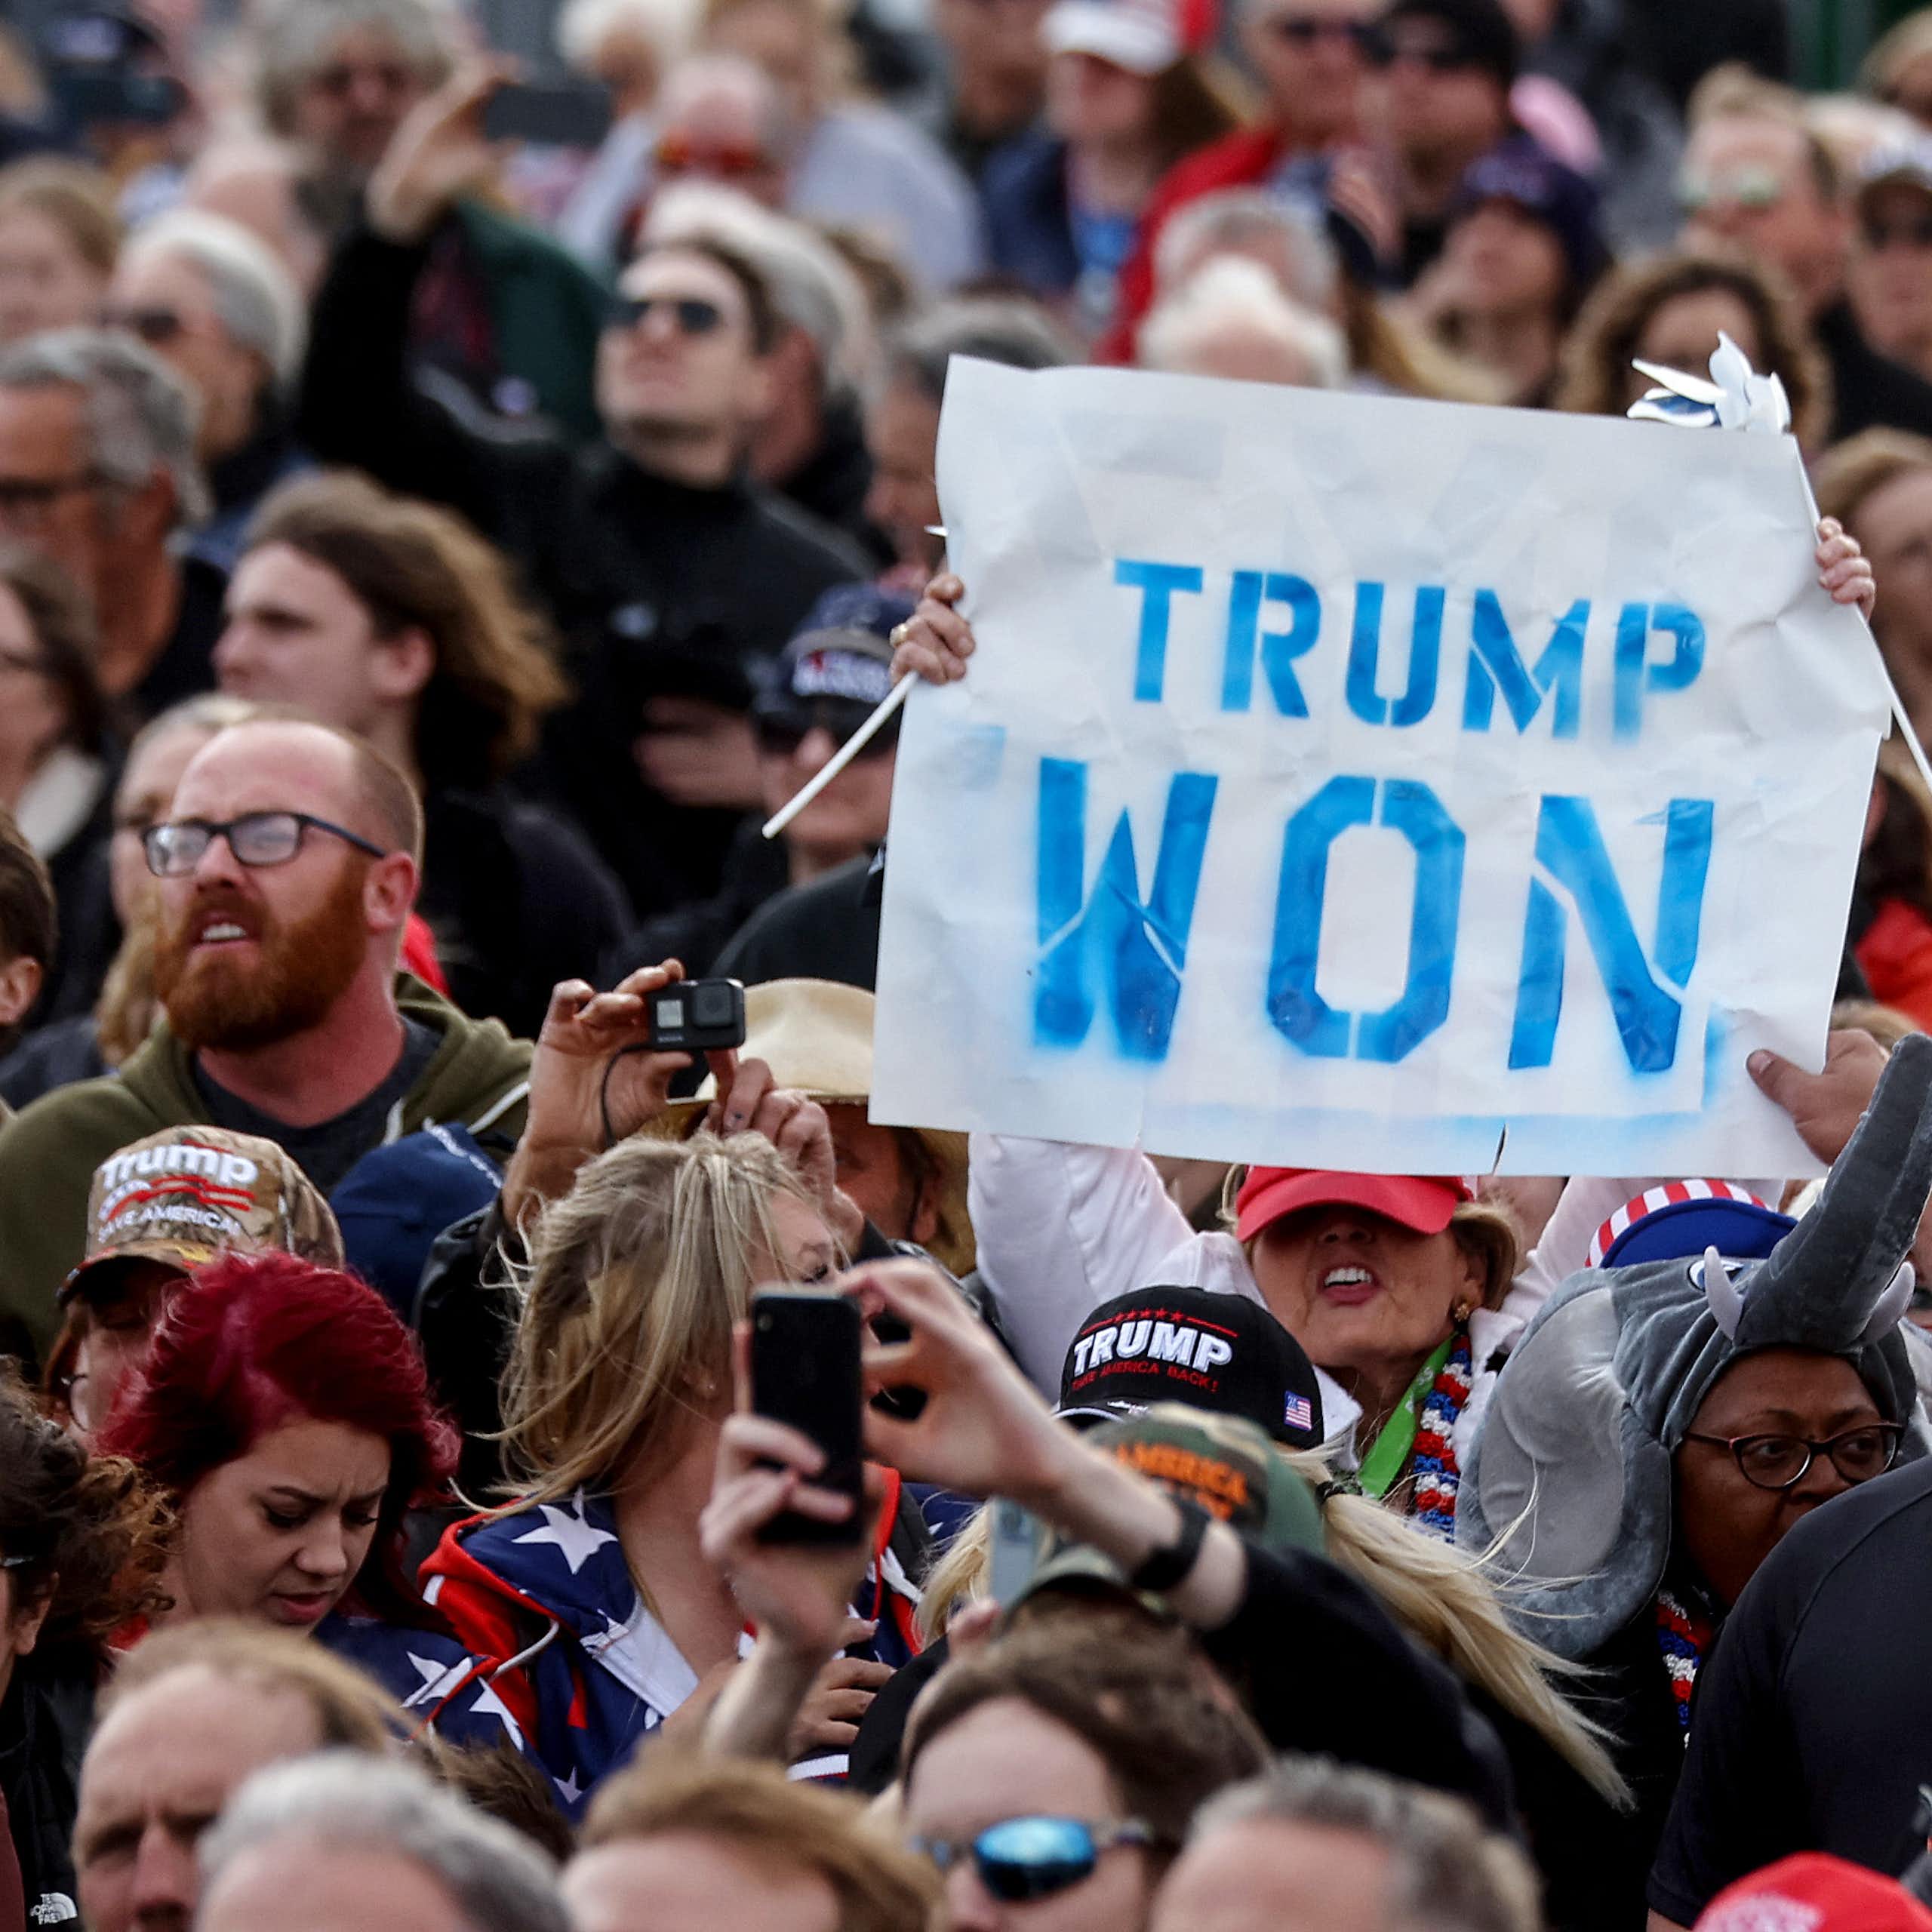 Why do millions of Americans believe the 2020 presidential election was ‘stolen’ from Donald Trump?